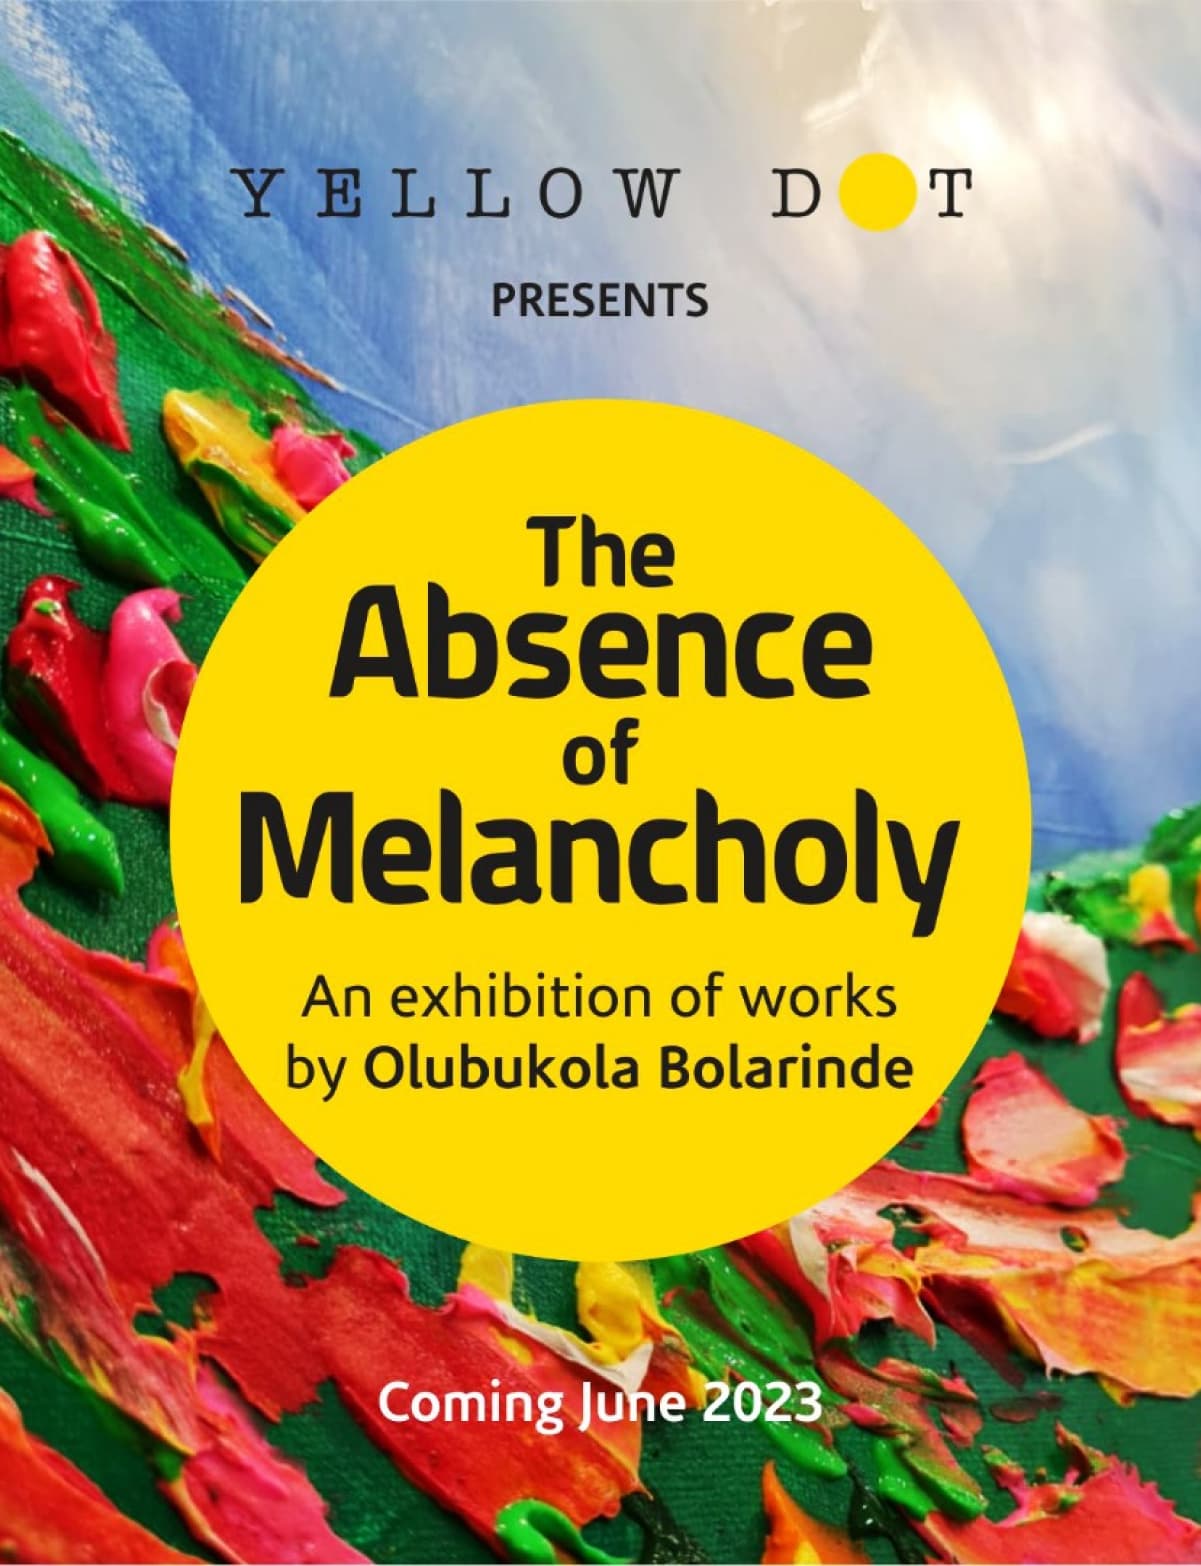 The Absence of Melancholy. Lagos – June 2023